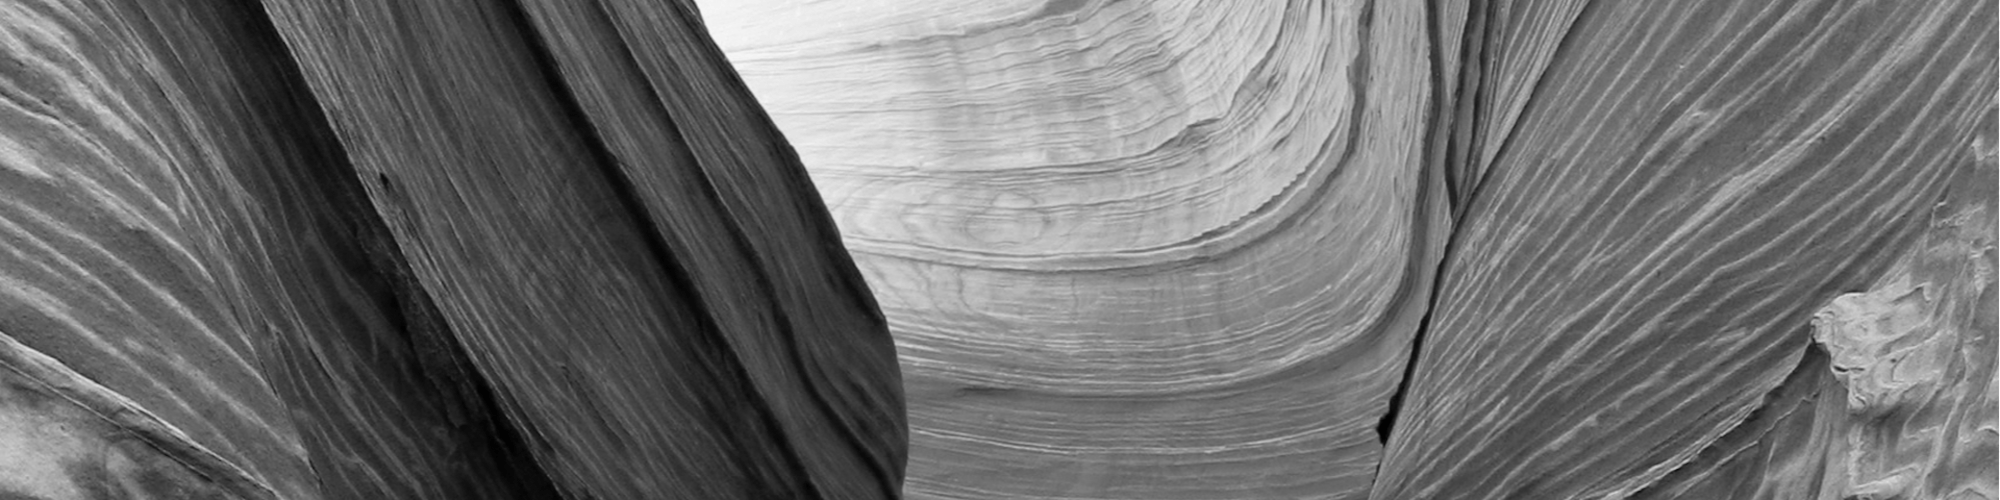 Black and White Photo of Canyon